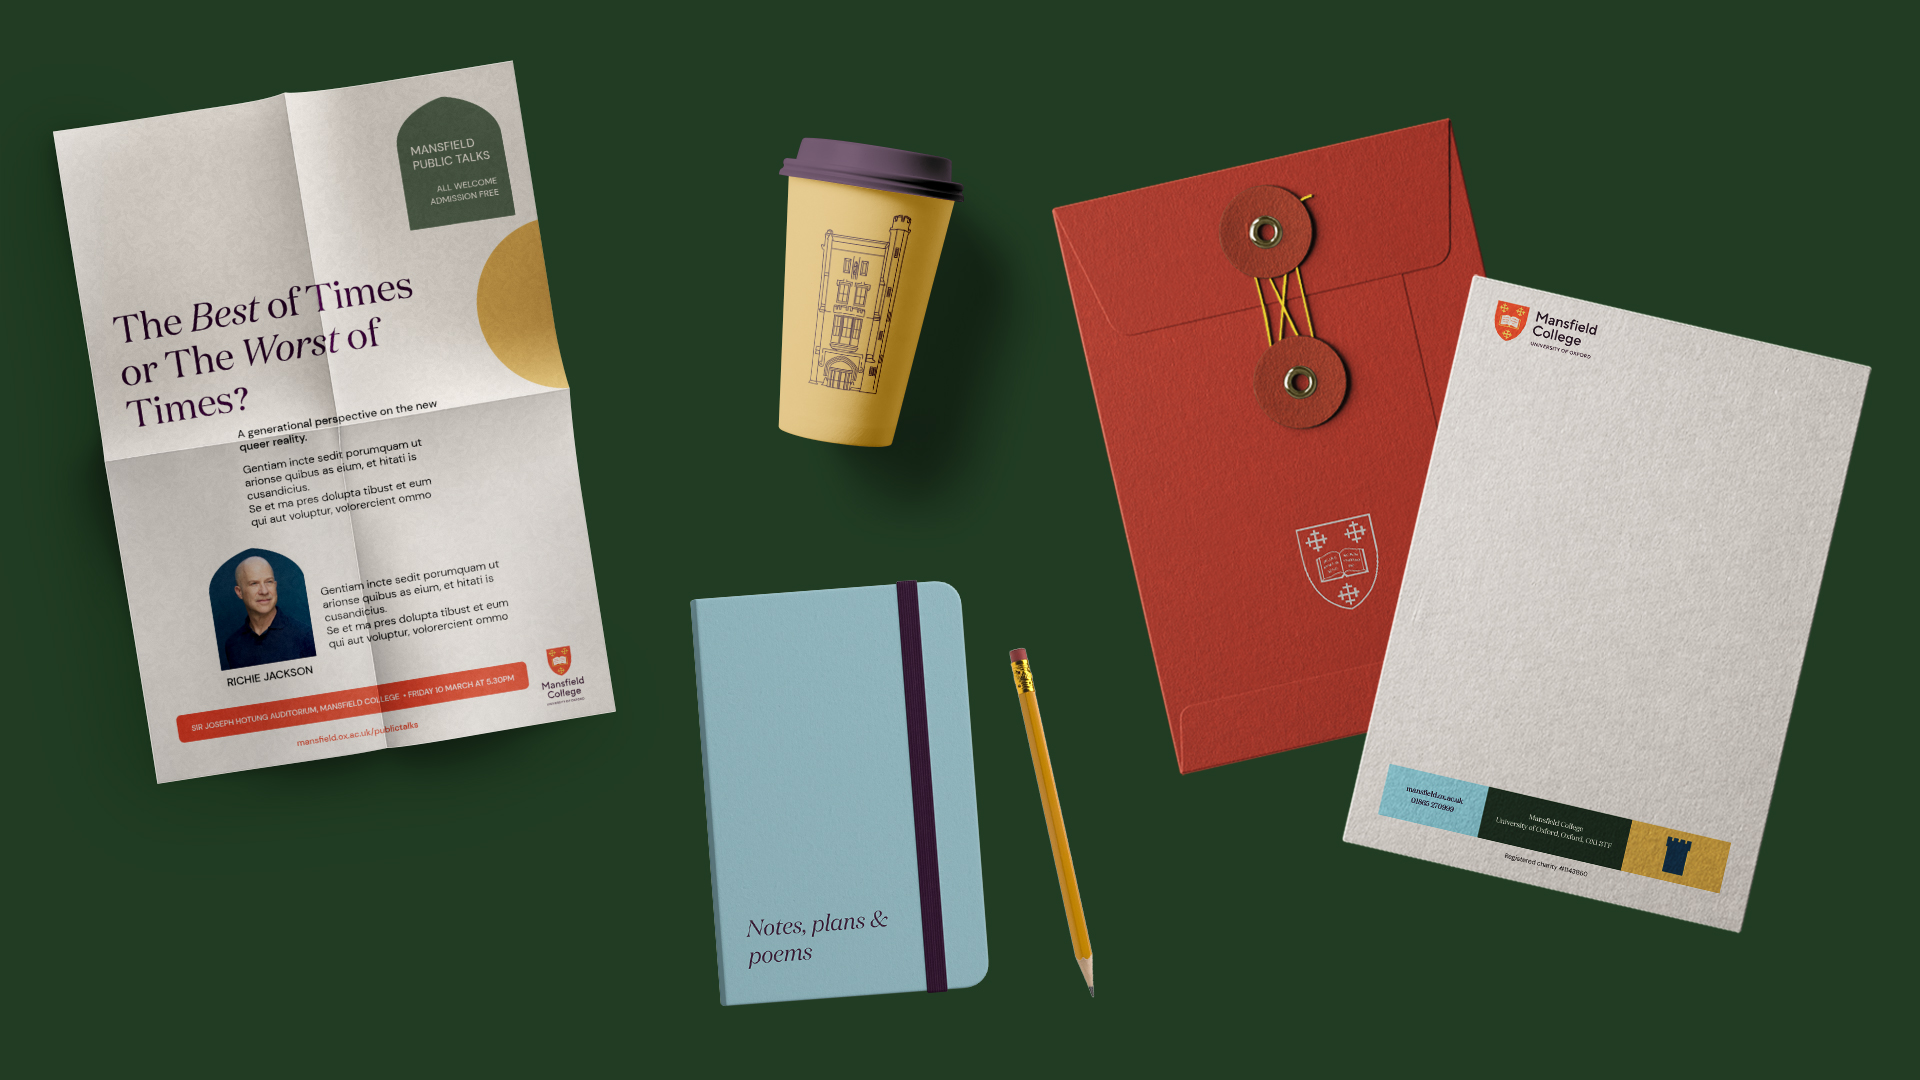 Brand identity design for Mansfield College, Oxford, showing notebook, headed paper, envelope and cup